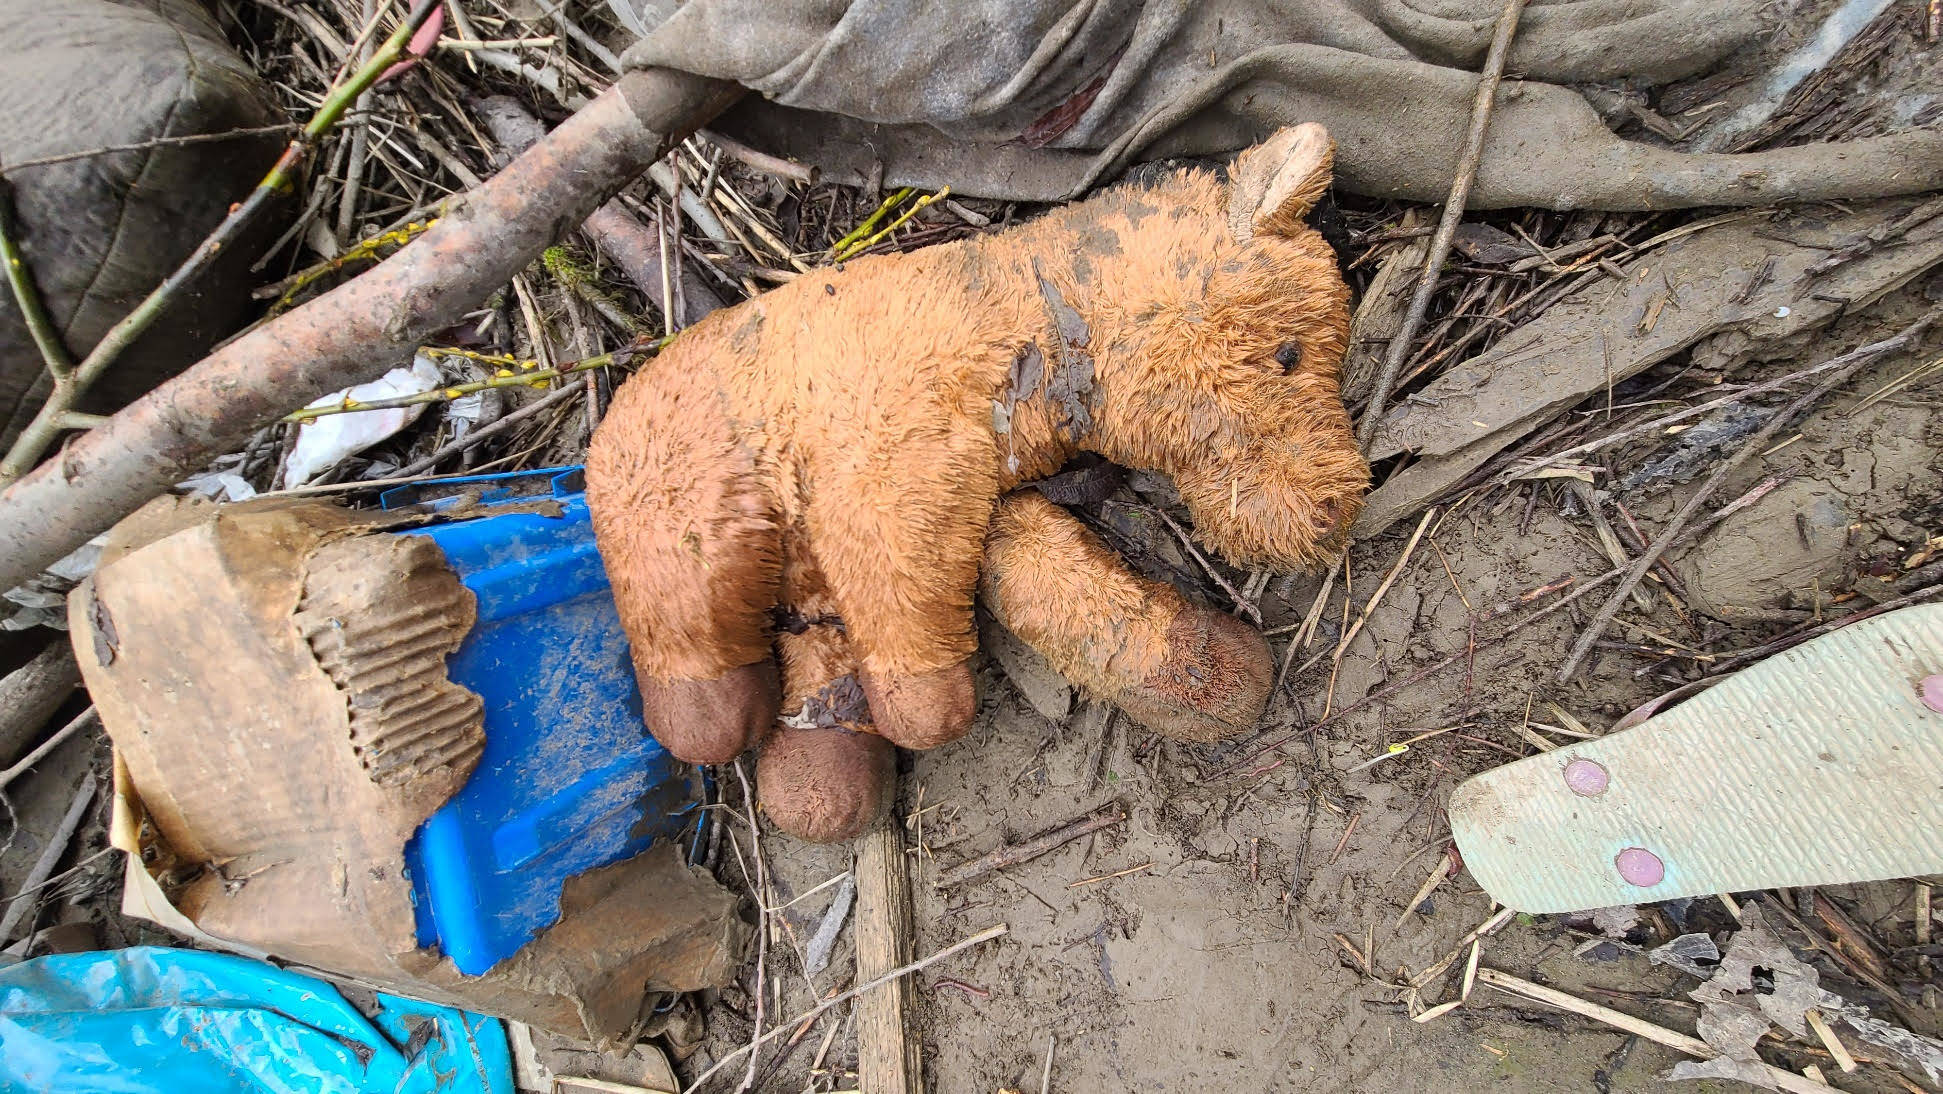 A child’s toy in the dirt at one of Auburn’s many homeless encampments, Courtesy photo, City of Auburn.